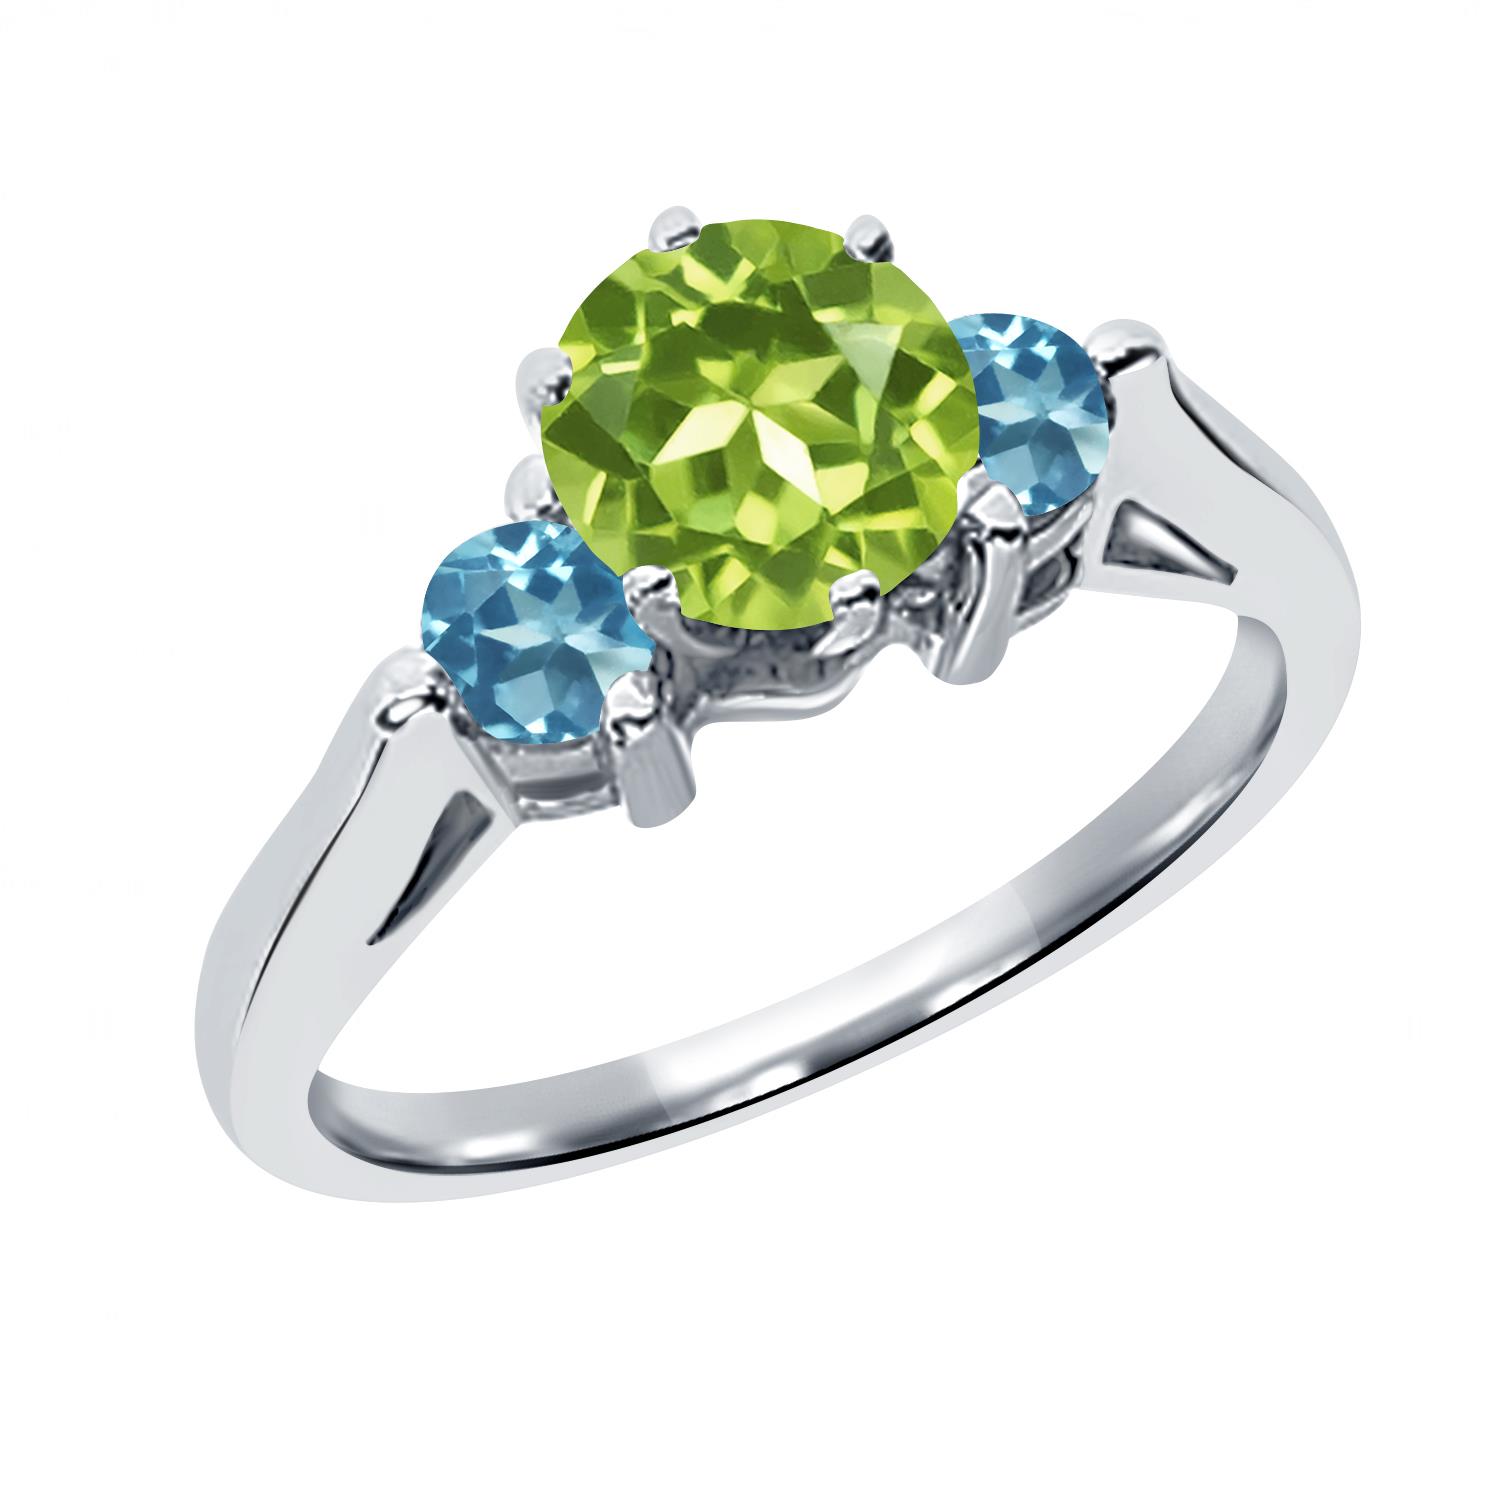 0.76 Ct Round Green Peridot Swiss Blue Topaz 925 Sterling Silver 3 Stone Ring 